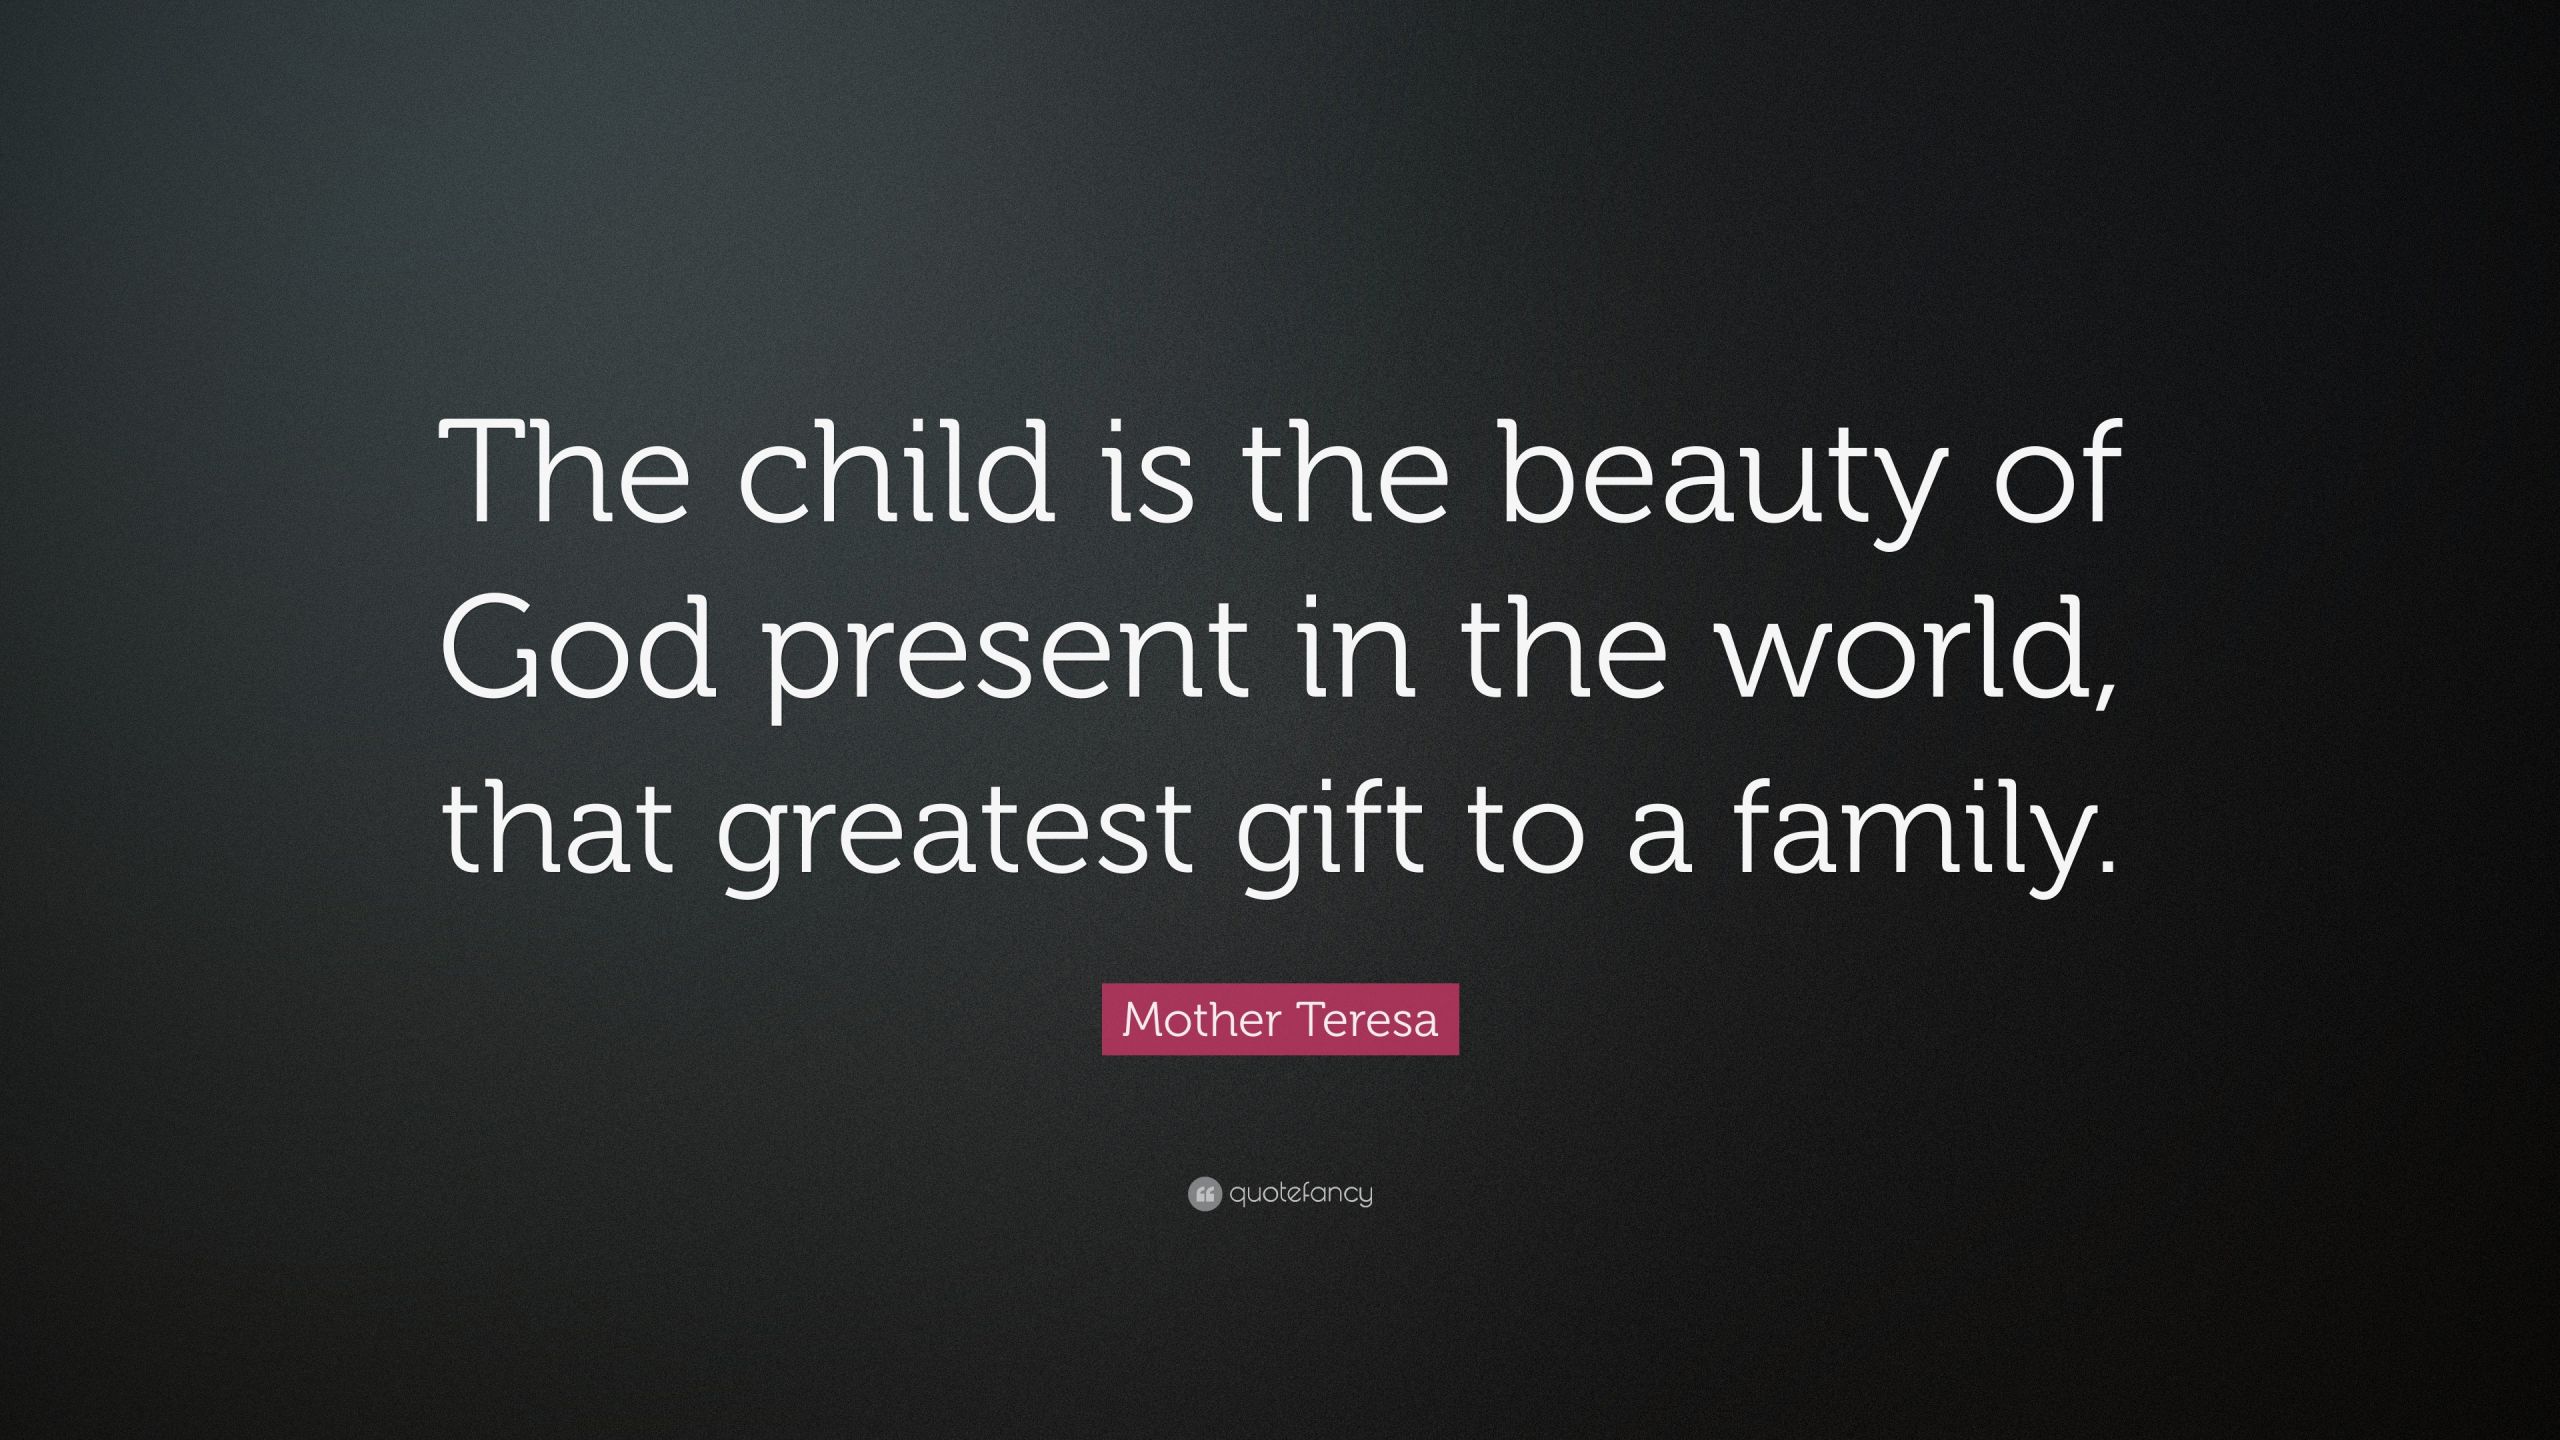 Mother Teresa Quotes On Family
 Mother Teresa Quote “The child is the beauty of God